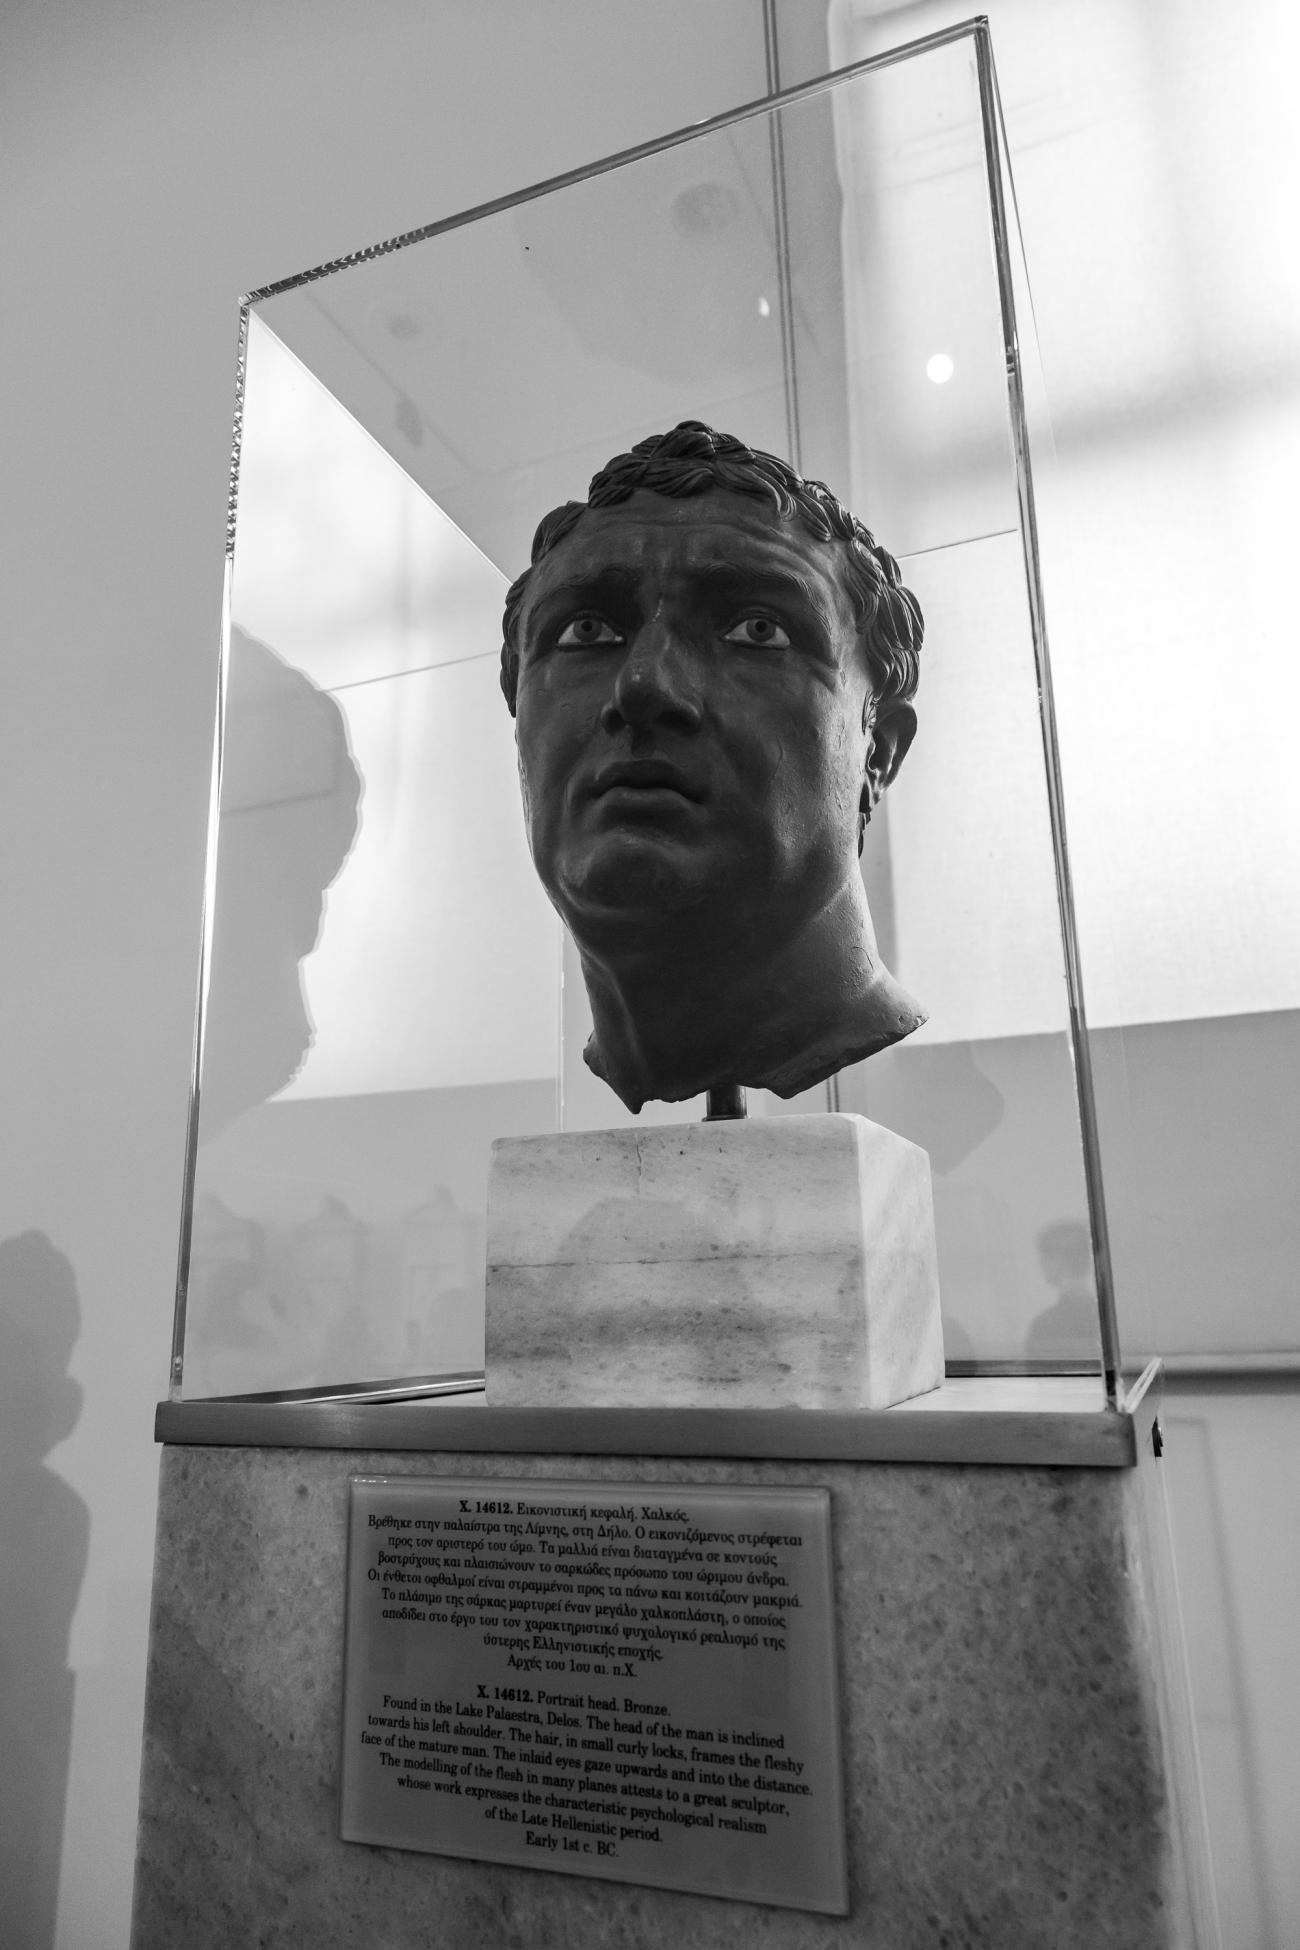 Portrait head made of bronze, found in the Lake Palaestra, Delos, on display at the National Archaeological Museum in Athens